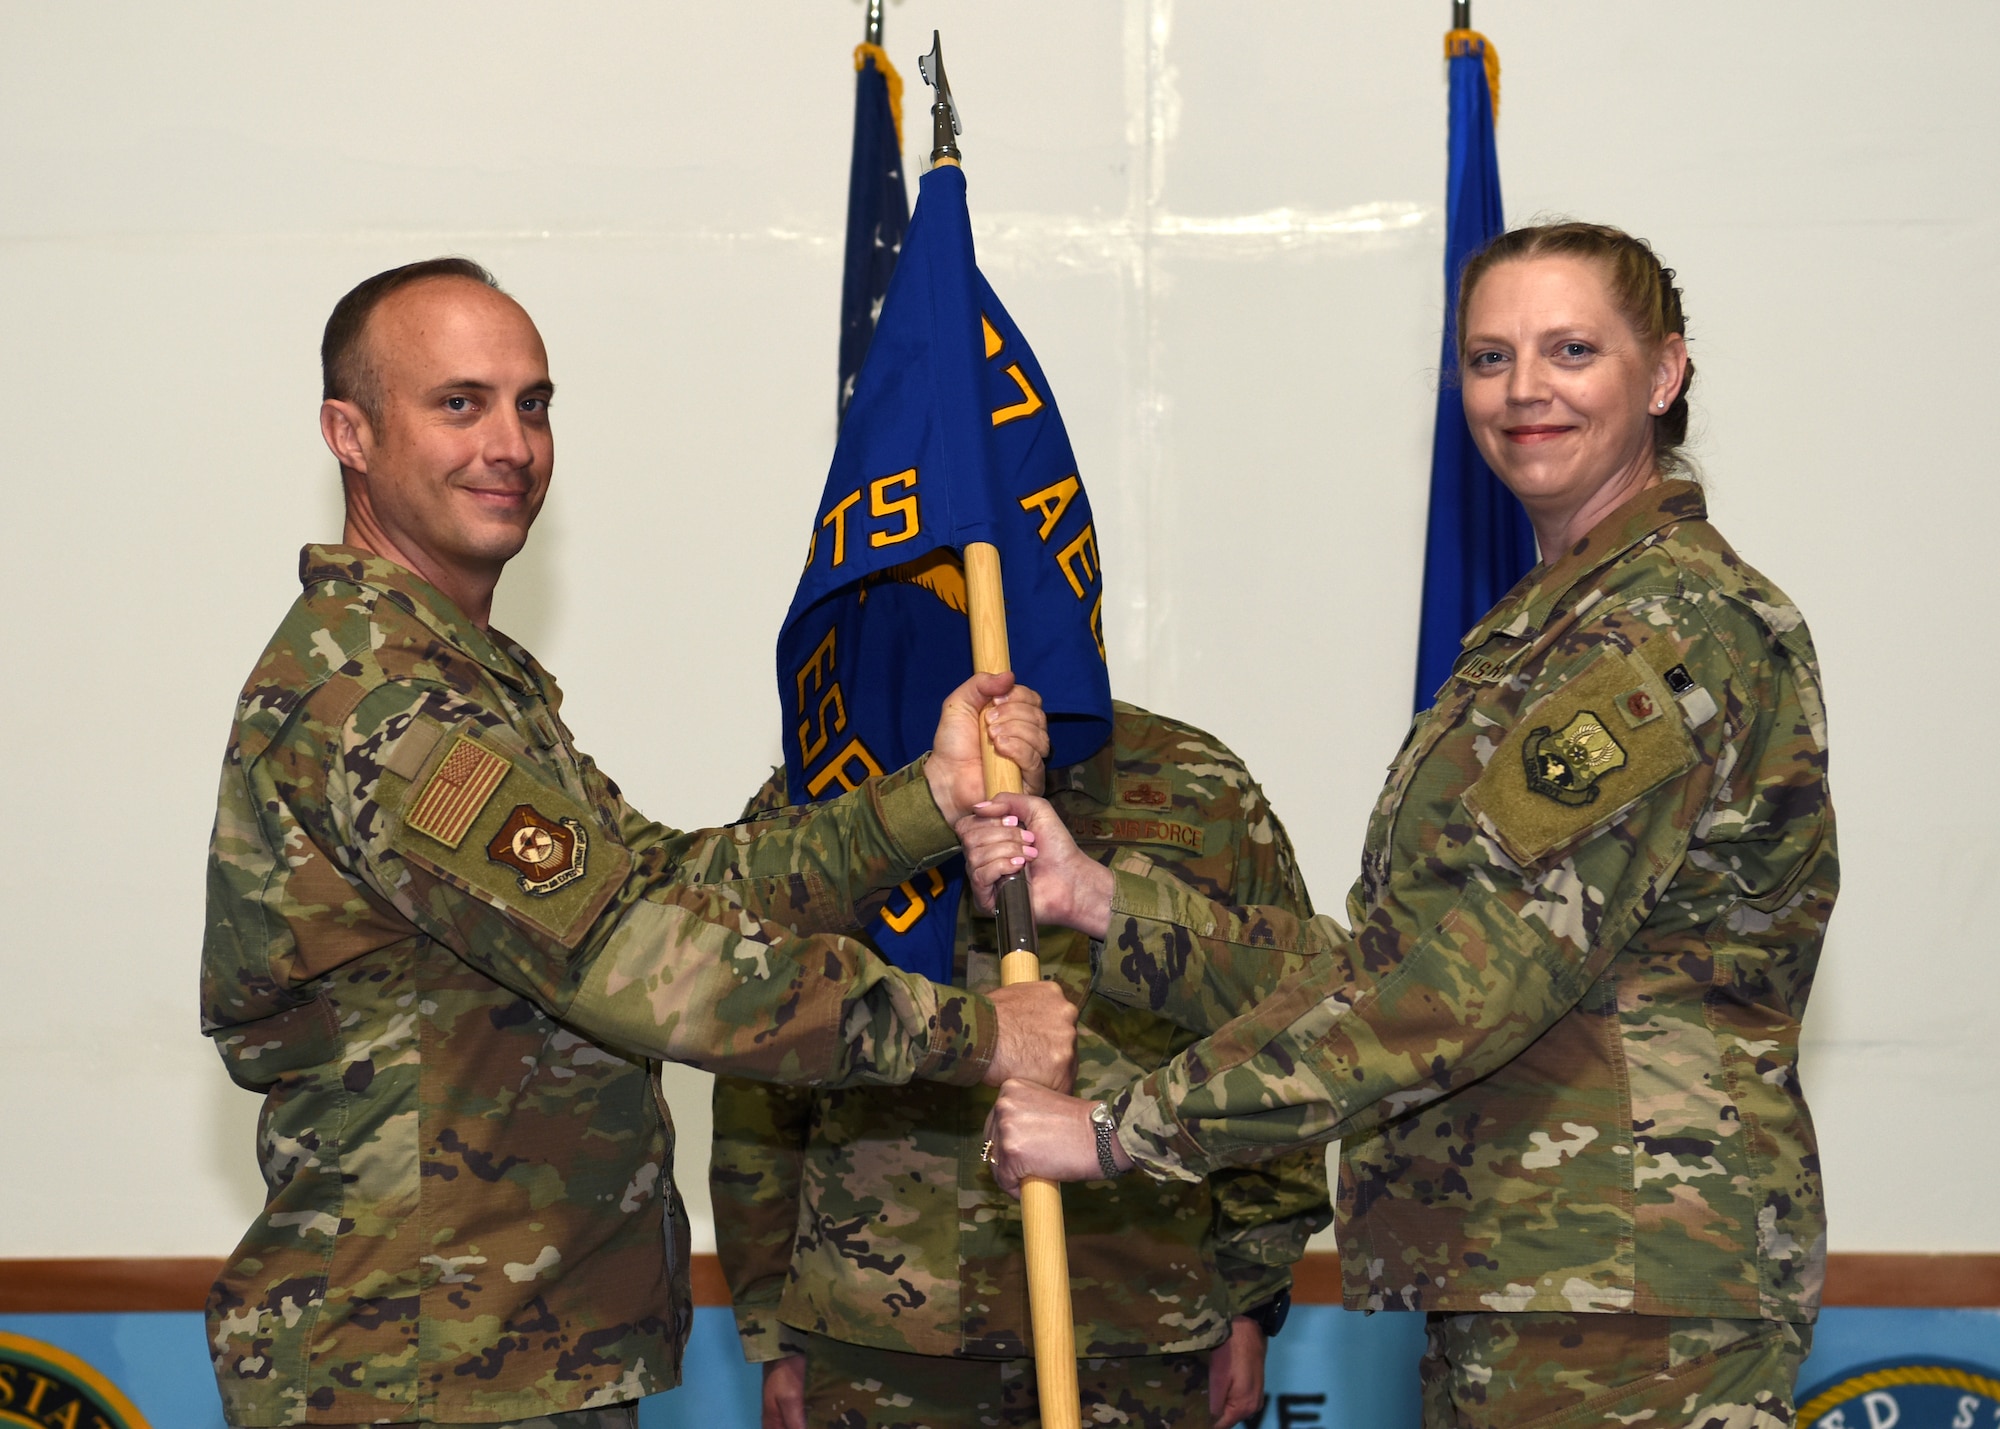 U.S. Air Force Col. David Morgan, 407th Air Expeditionary Group commander, left, passes the ceremonial guidon to Lt. Col. Michelle Gill, incoming 407th Expeditionary Support Squadron commander, right, during a change of command ceremony at Ahmed Al Jaber Air Base, Kuwait, Jan. 28 2020.